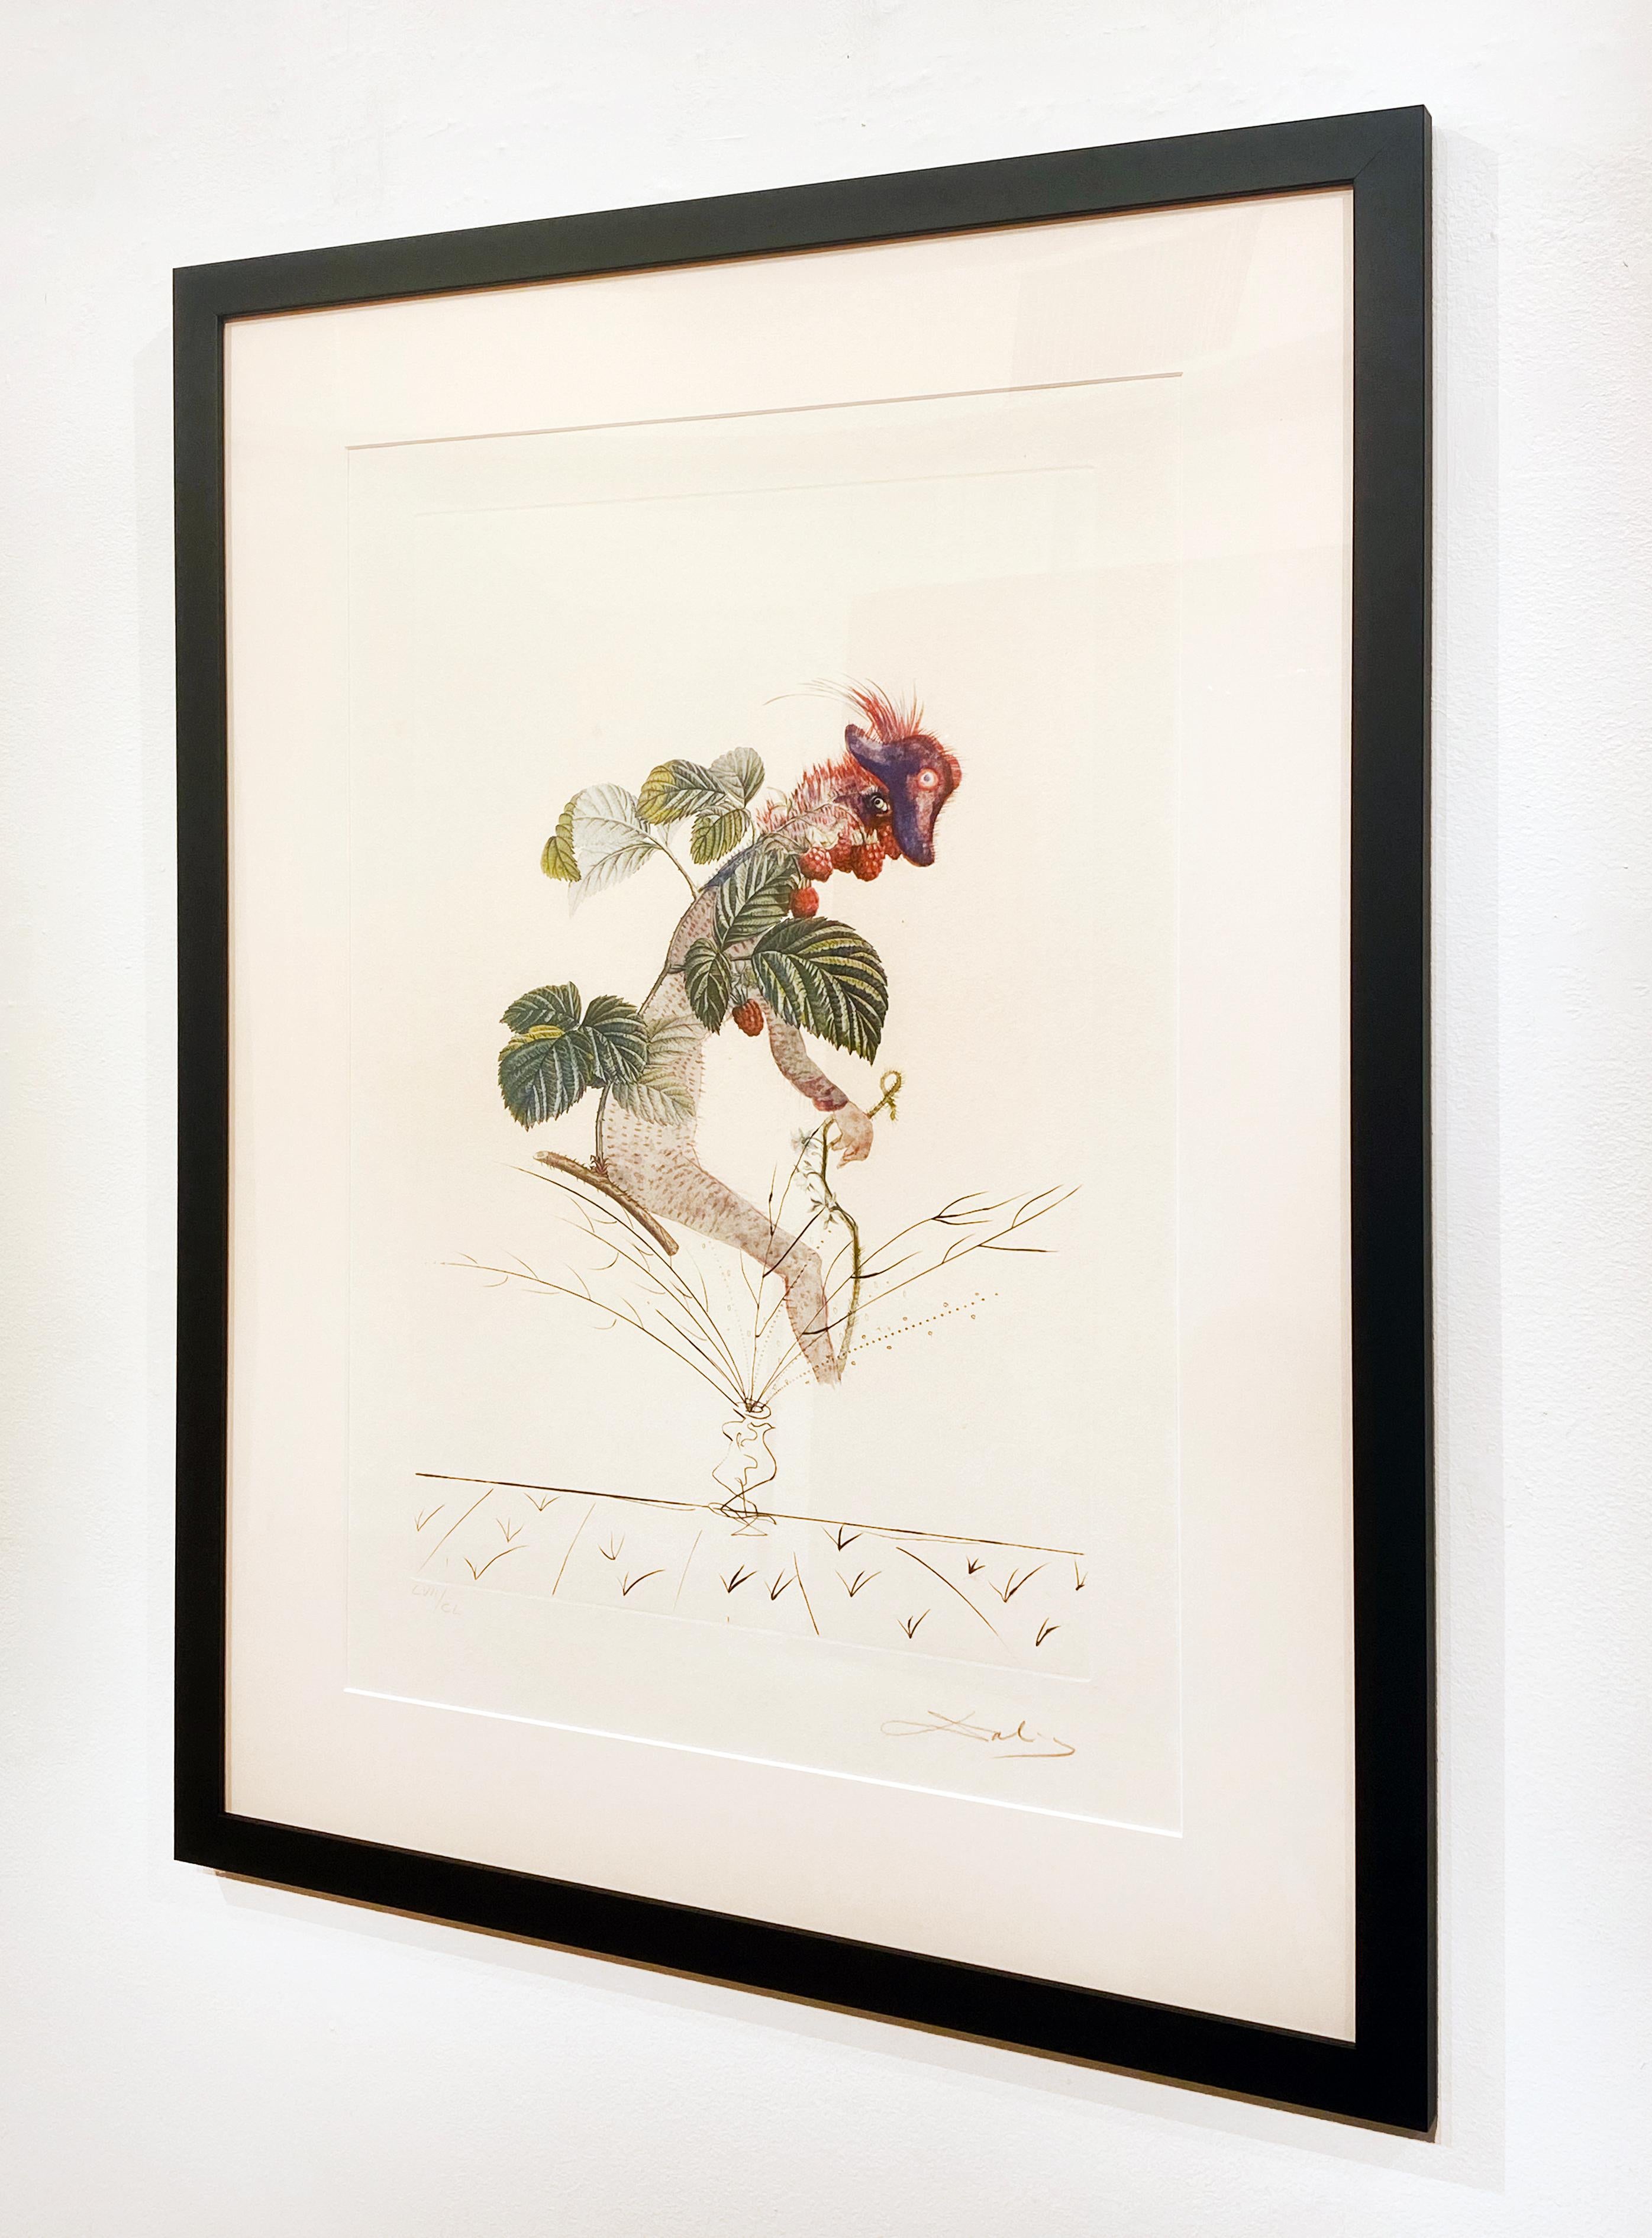 Artist:  Dali, Salvador
Title:  Raspberry Bush
Series:  Flors Dali (The Fruits)
Date:  1969
Medium:  Lithograph with original drypoint remarques
Framed Dimensions:  37